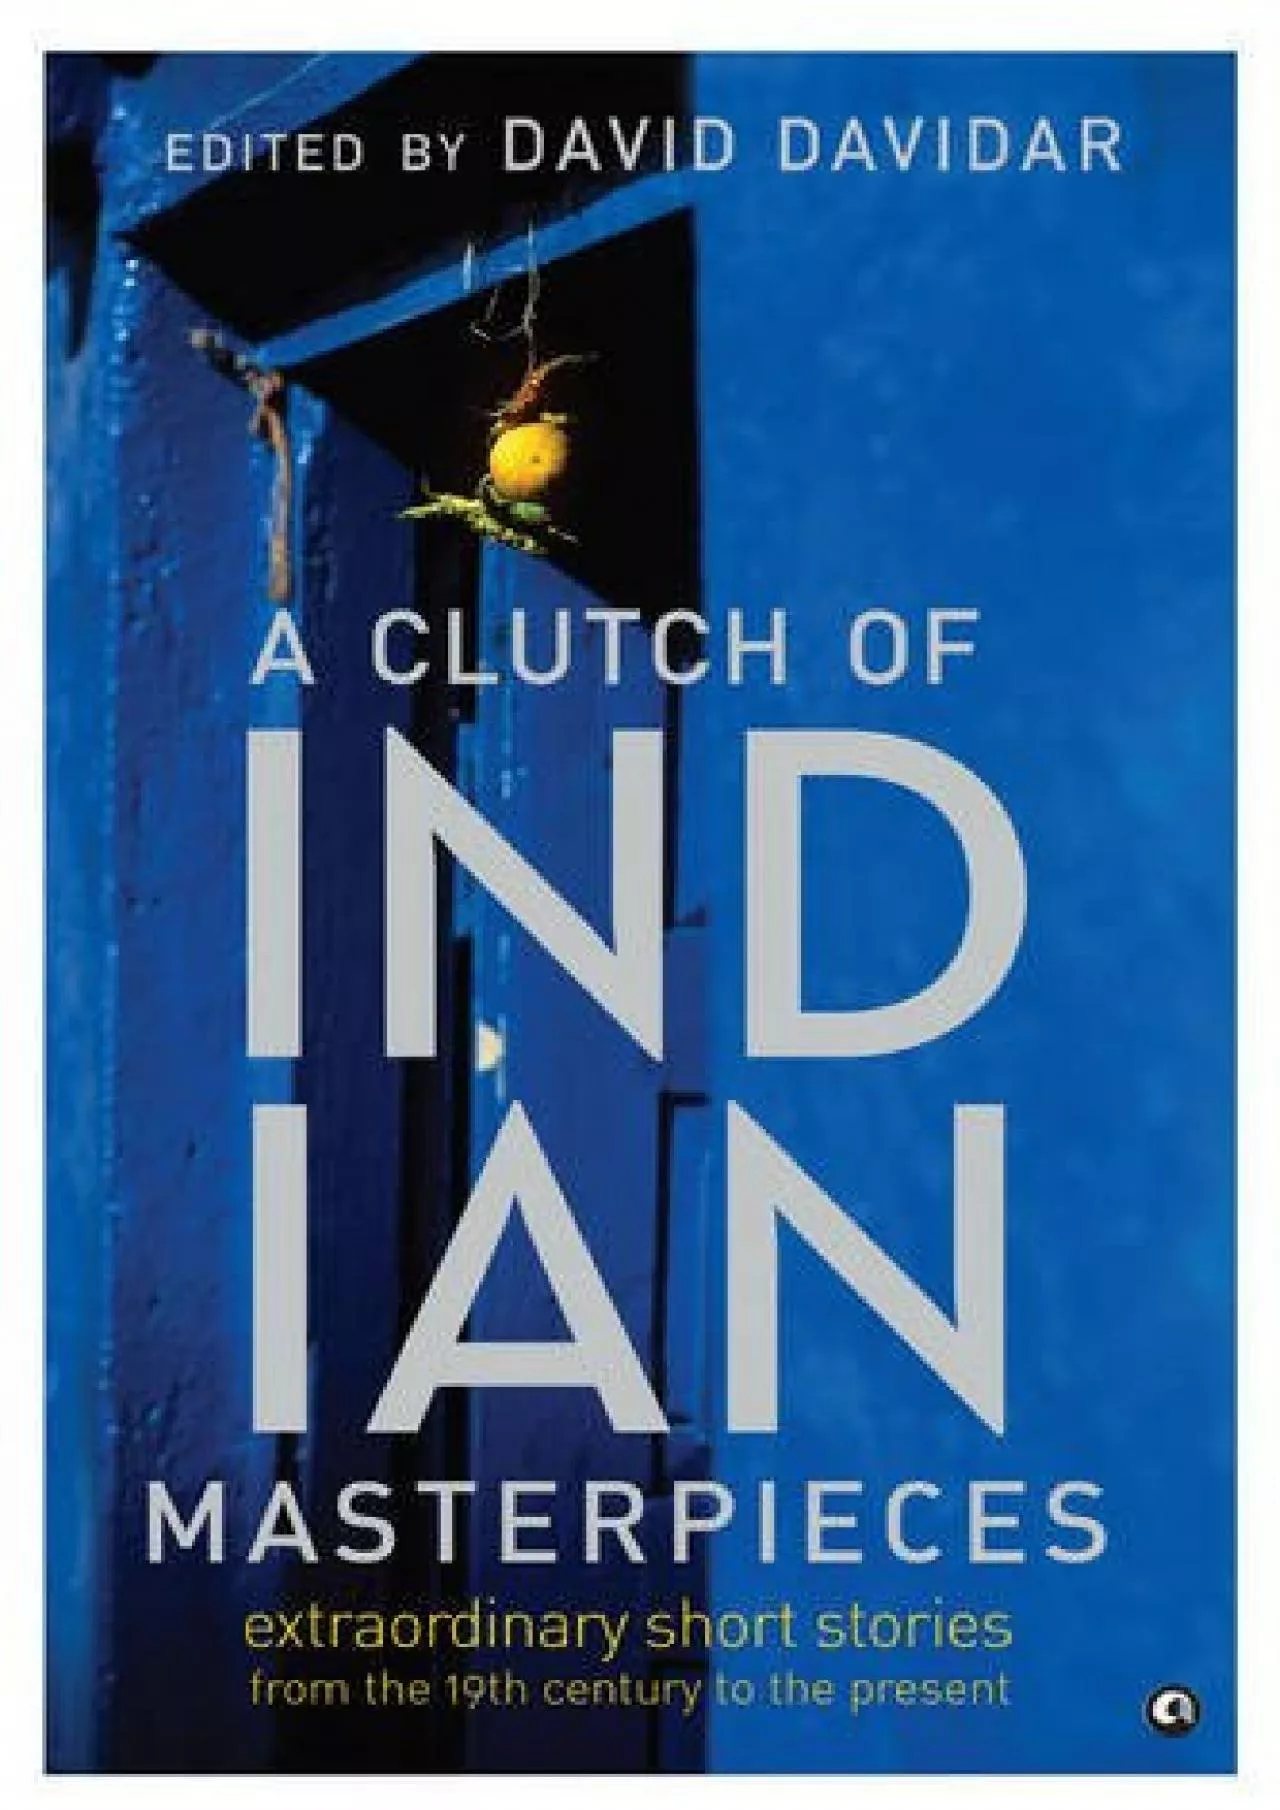 (EBOOK)-A Clutch of Indian Masterpieces: Extraordinary Short Stories from the 19th Century